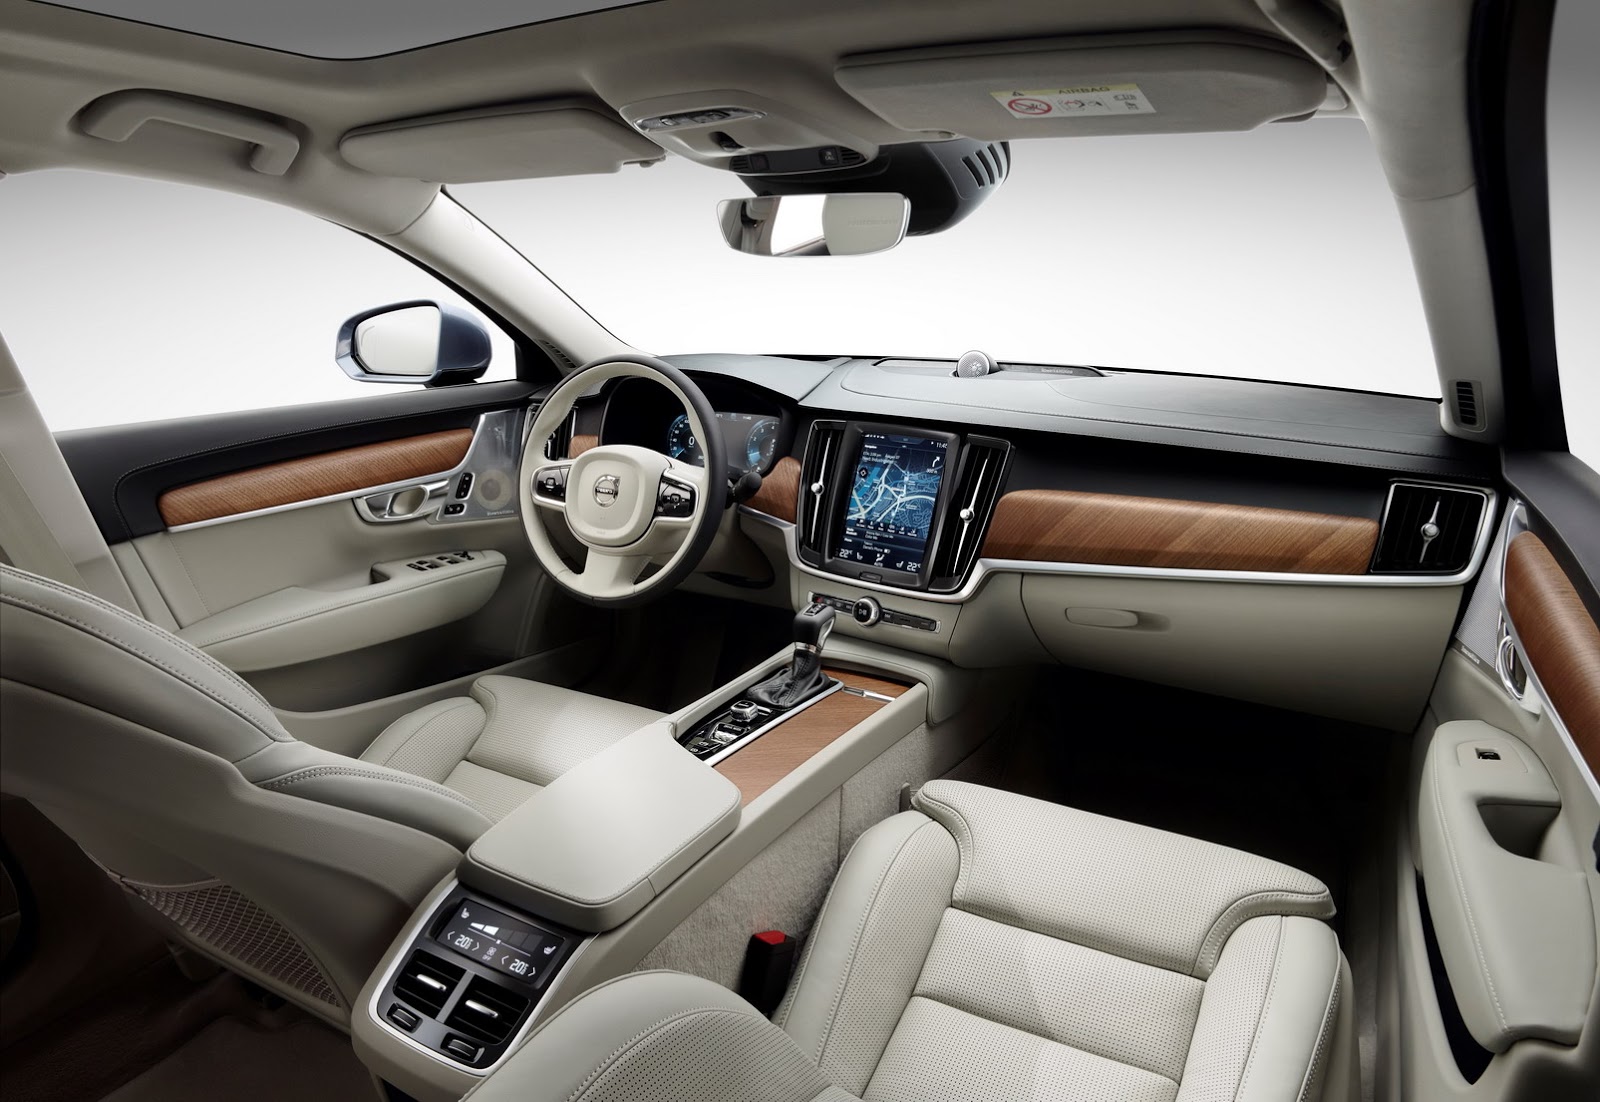 Images of Volvo S90 | 1600x1102